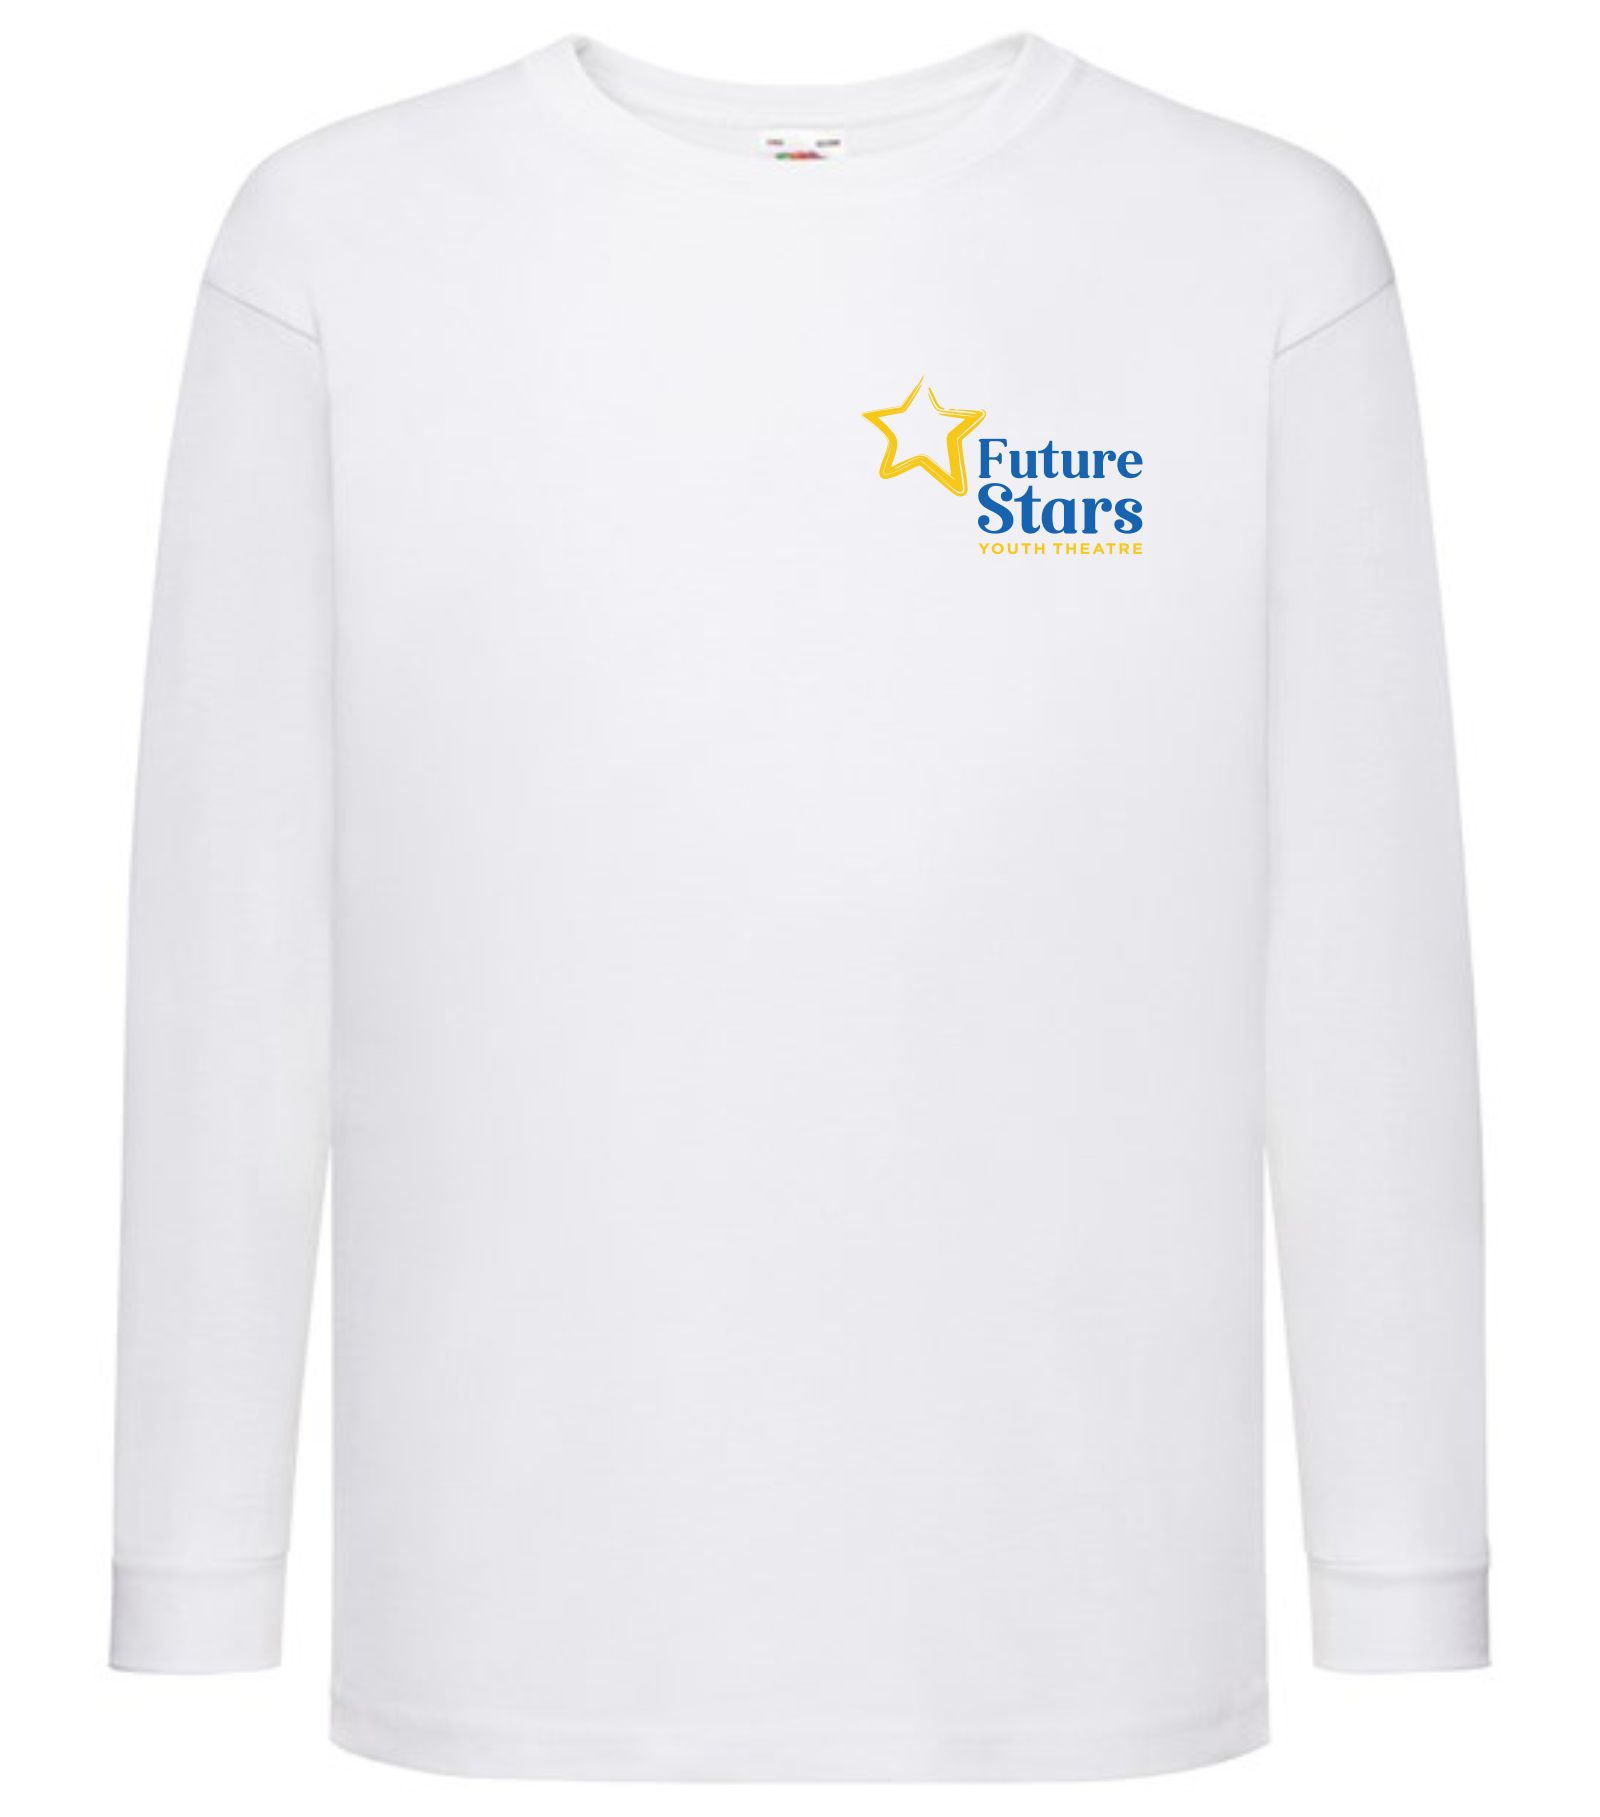 Future Stars Youth Theatre – White Long T Shirt (Adults)